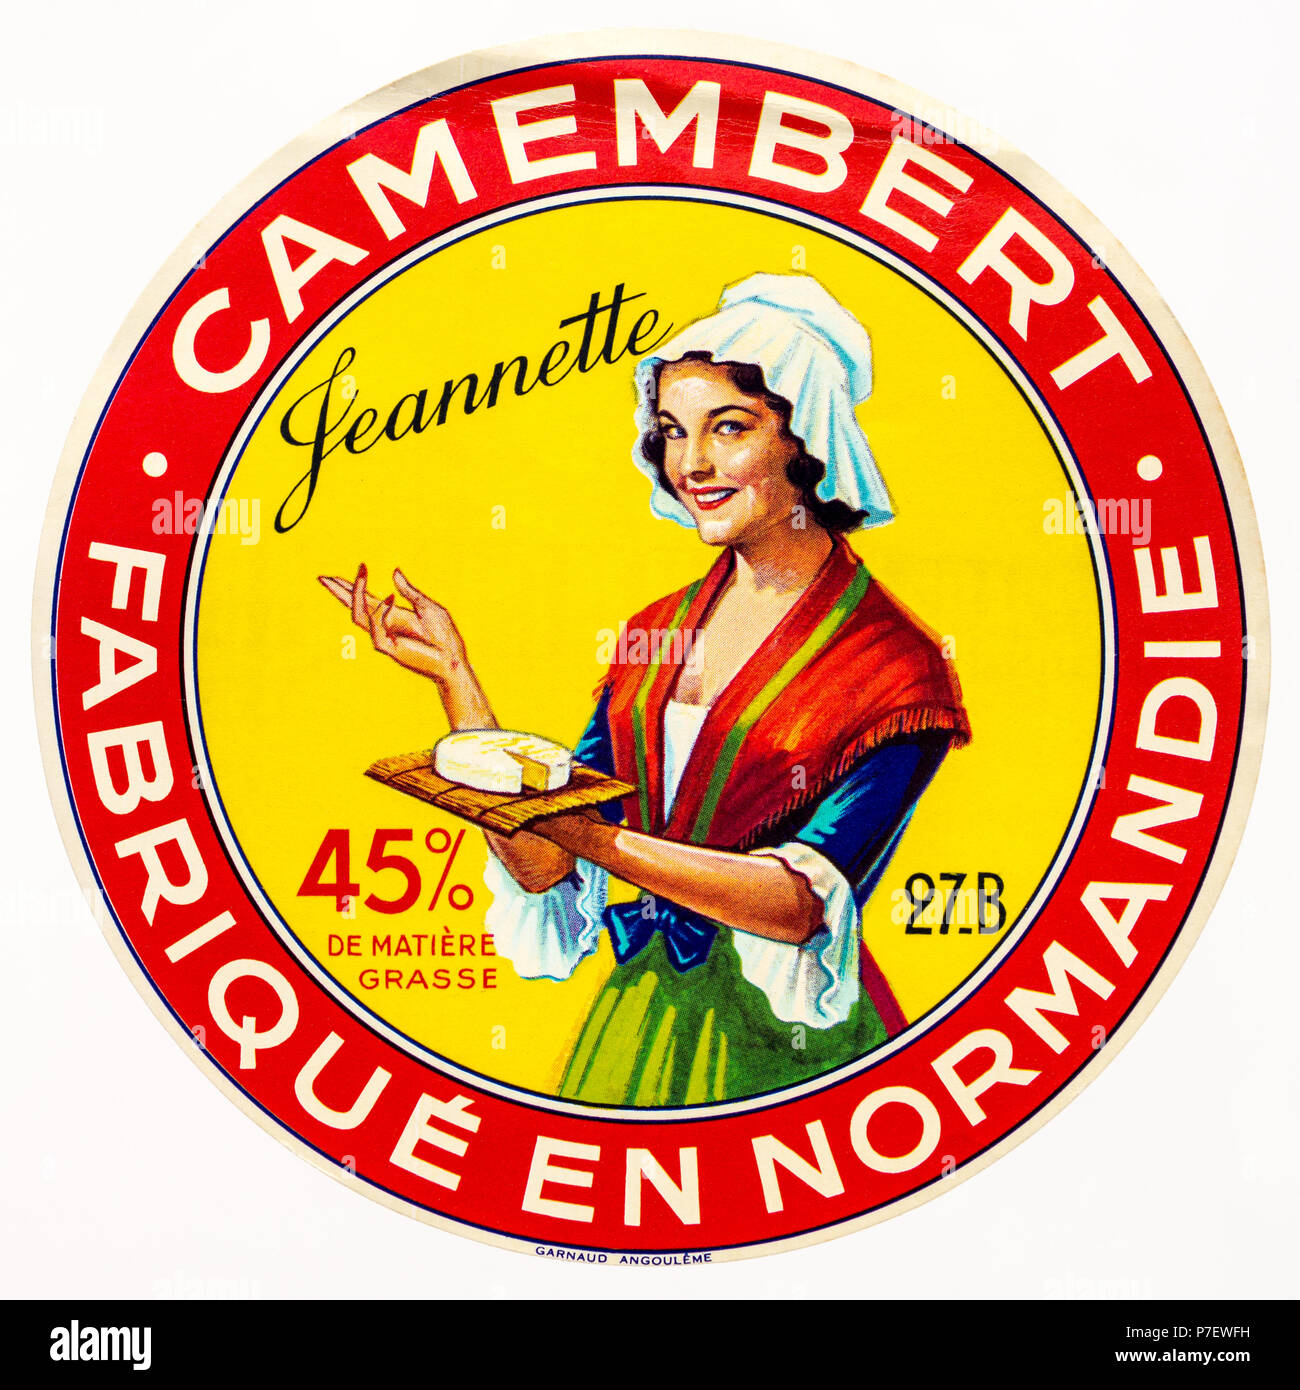 French Camembert cheese box-top label. Stock Photo